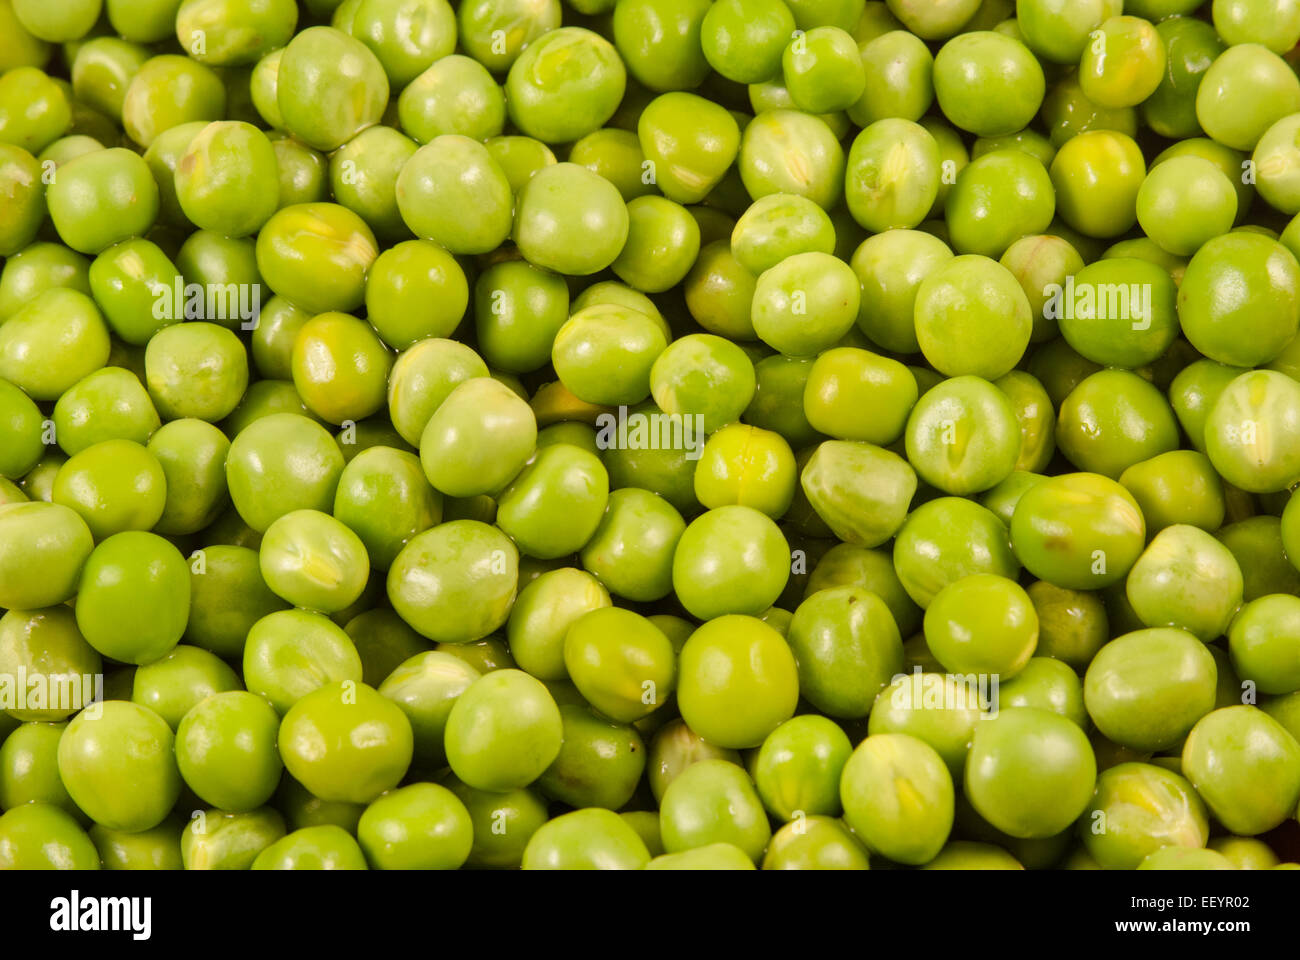 Green Peas background texture vegetable illuminated with natural light Stock Photo